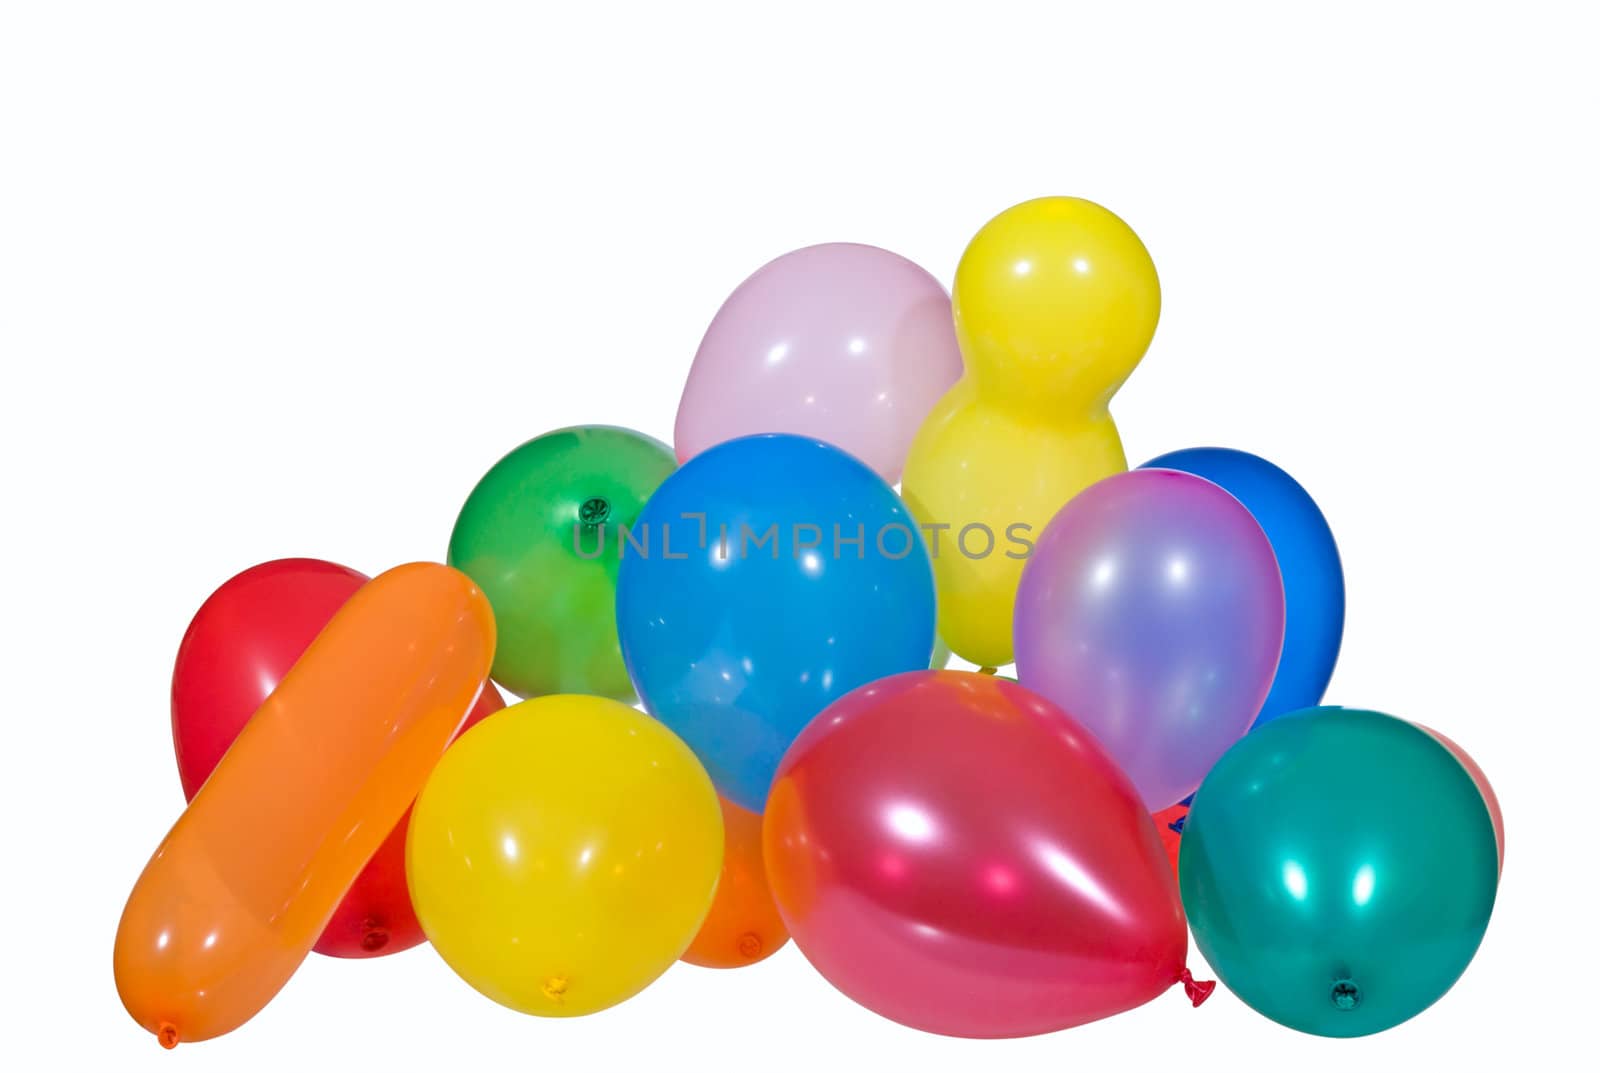 Inflatable balloons,  photo on the white background 